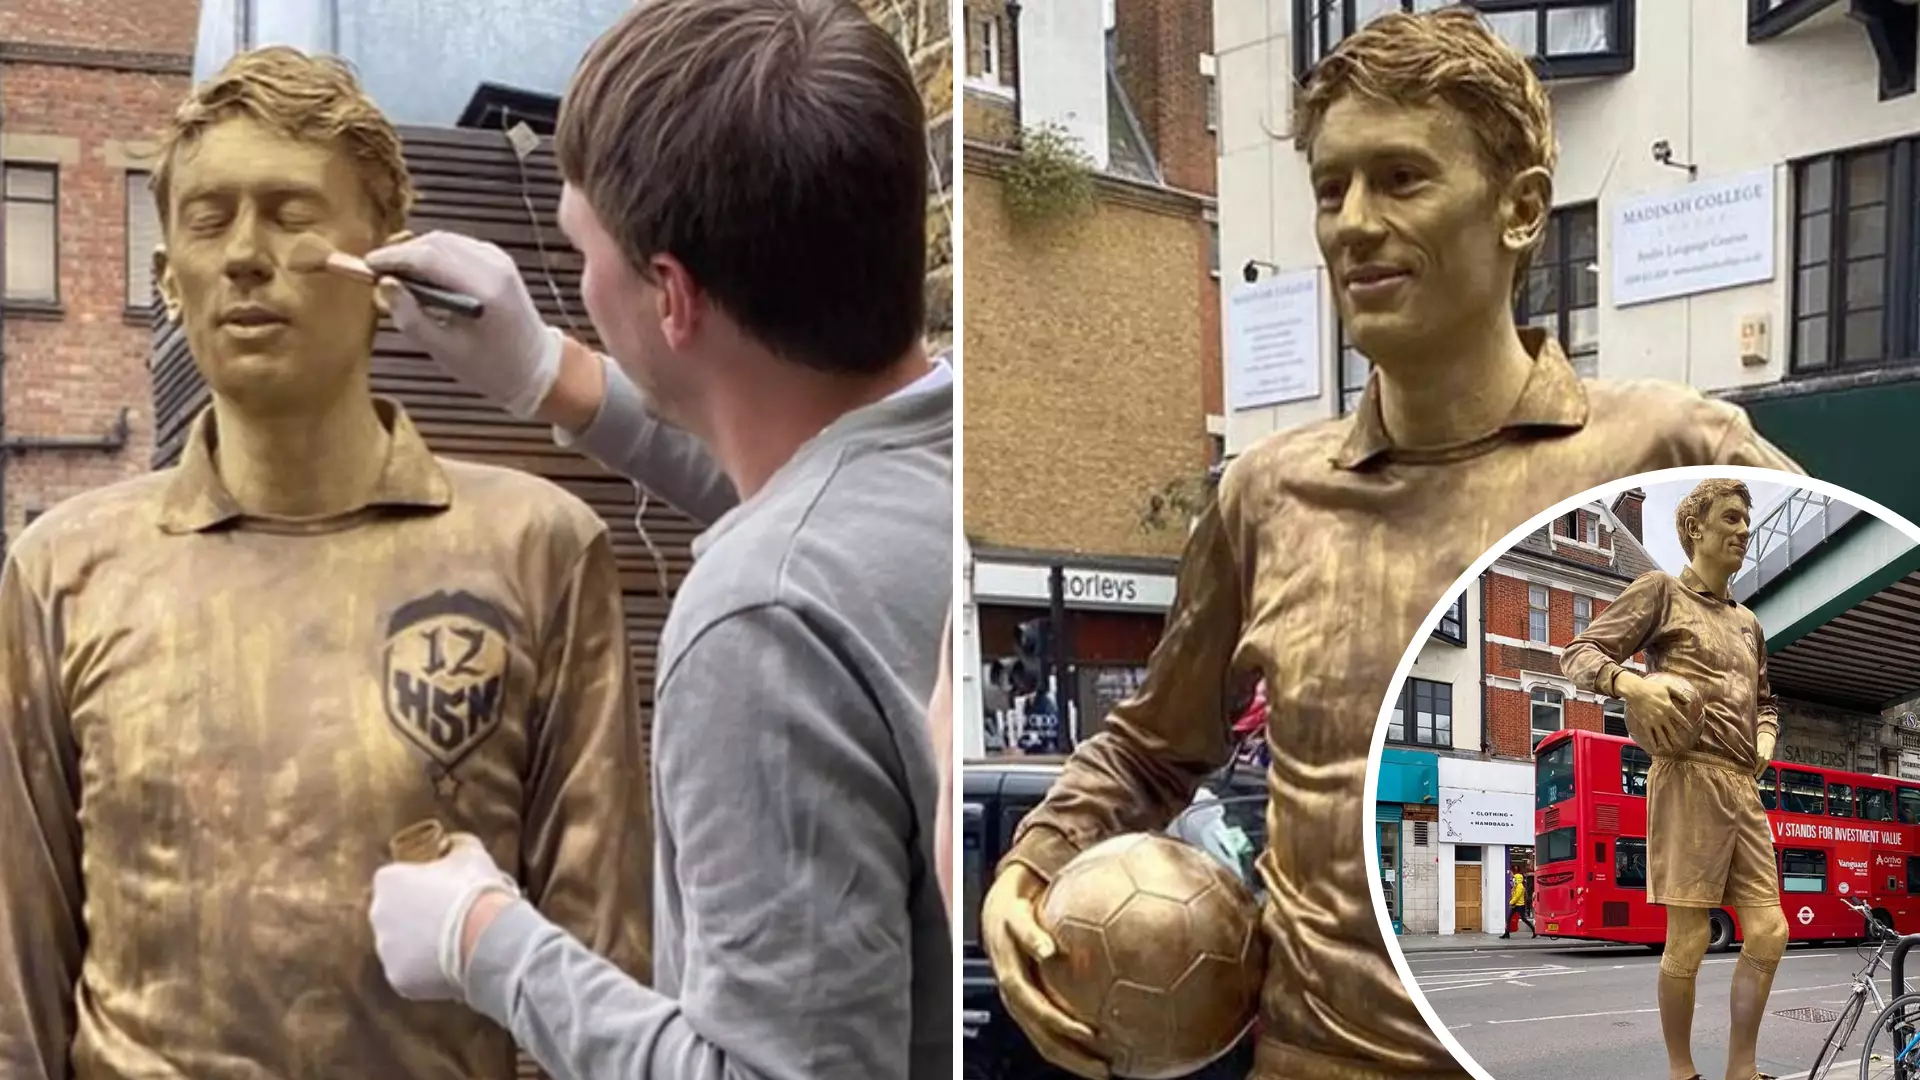 Man Painted In Gold And Becomes A Human Trophy After Losing Bet In Fantasy Football